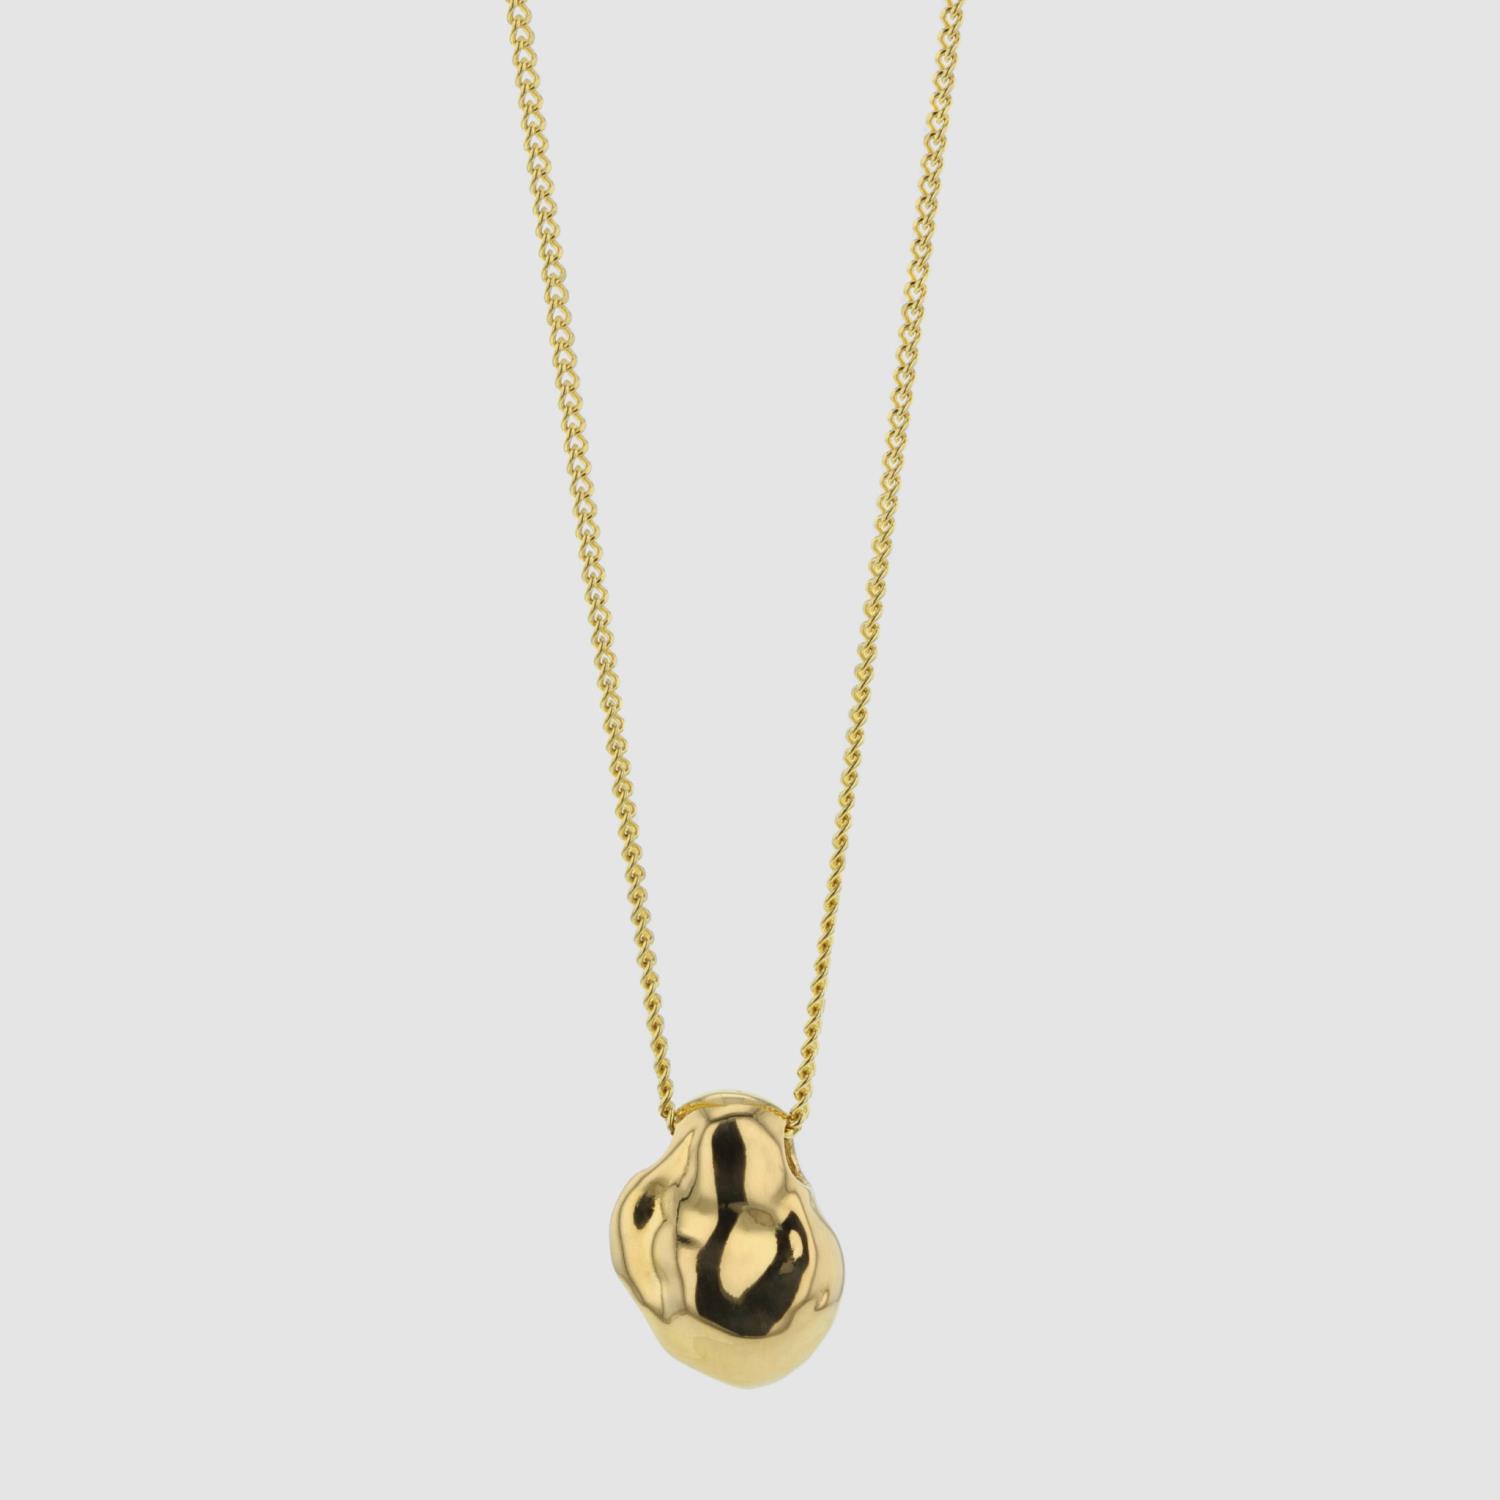 Hasla, In toto whole necklace gold